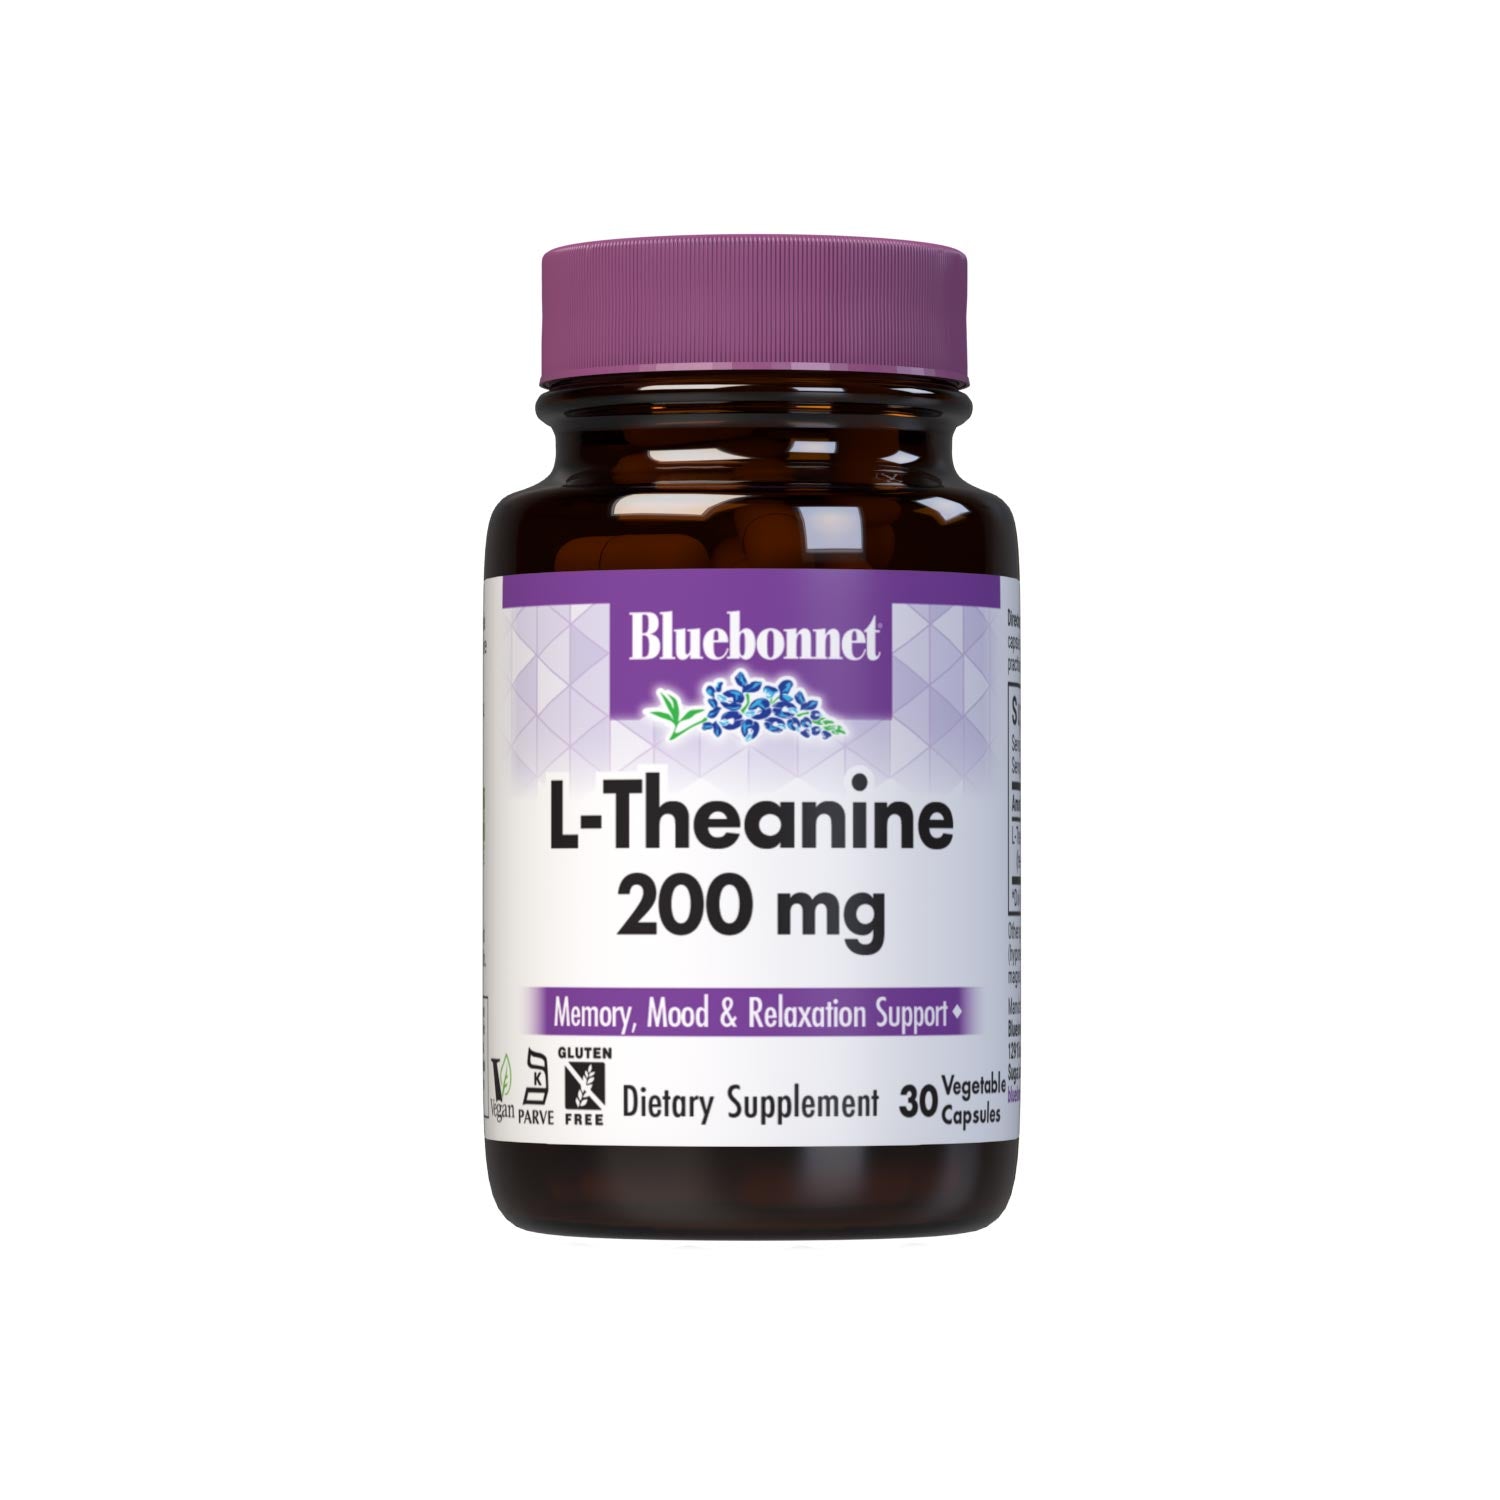 Bluebonnet L-Theanine 200 mg 30 Vegetable Capsules are formulated with the free-form amino acid L-theanine in its crystalline form, which may improve memory and learning as well as support an overall sense of relaxation. #size_30 count